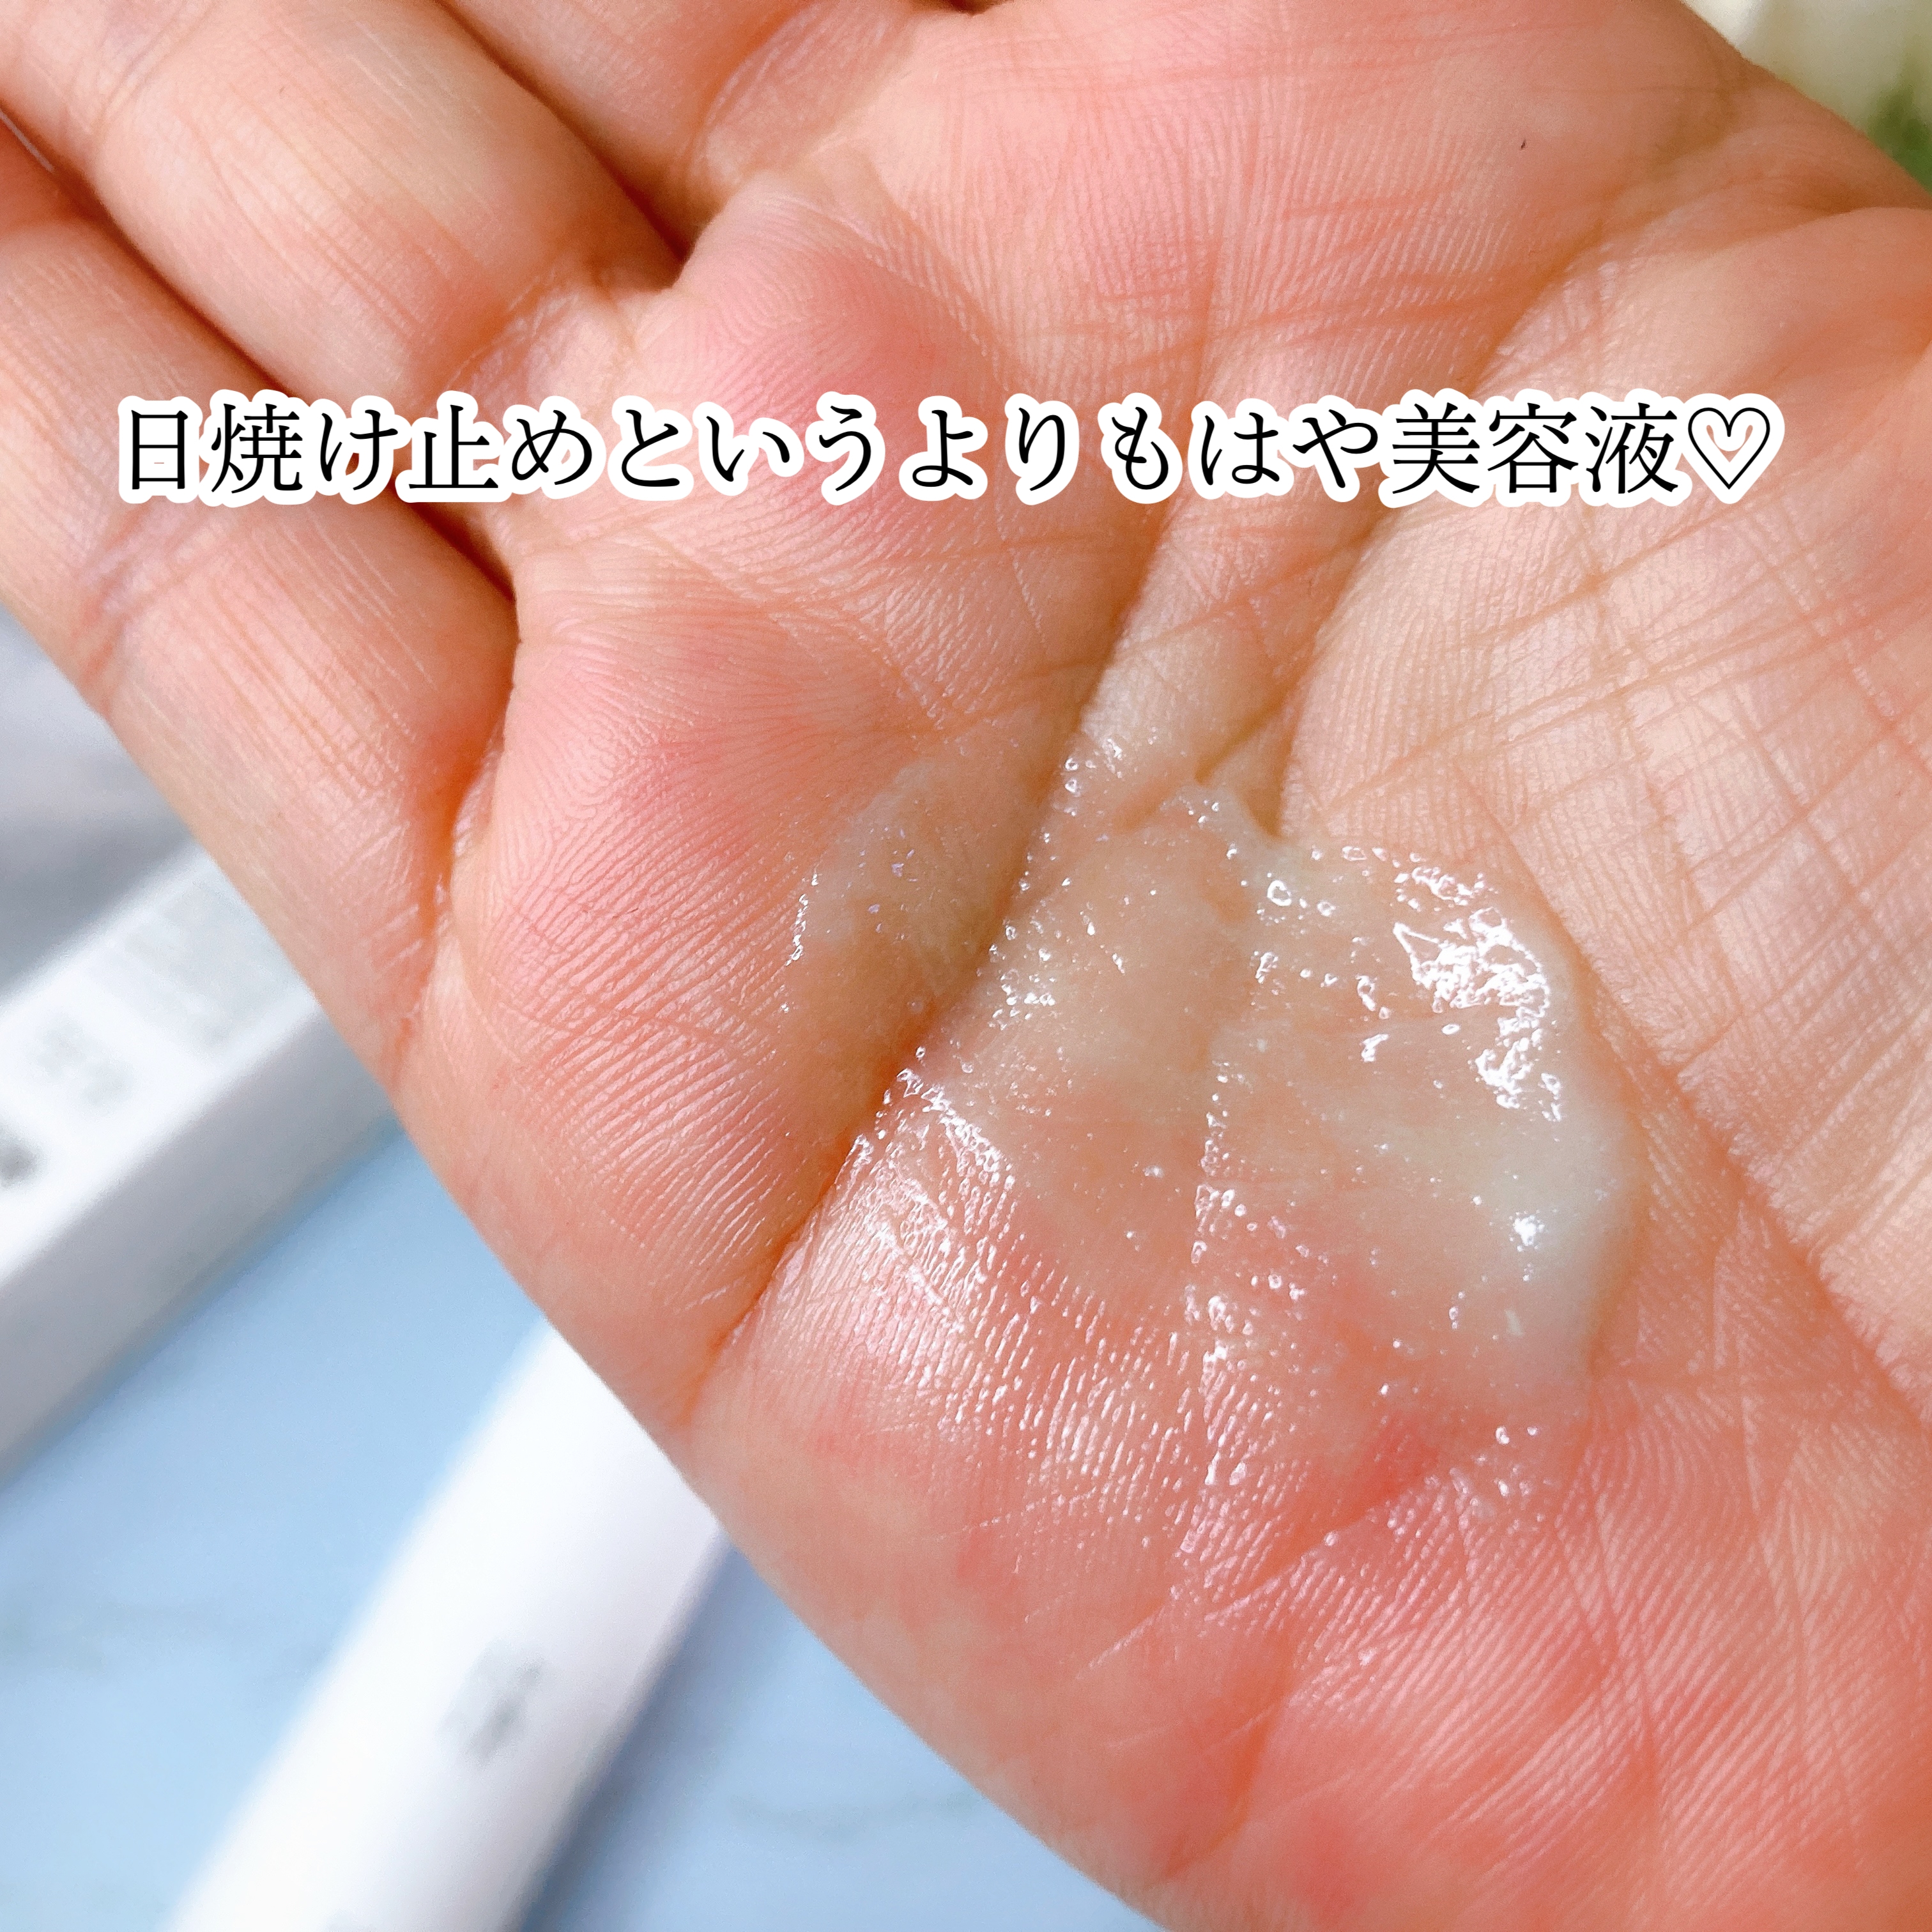 Dr.altheaCICA RELIEF SUN ESSENCEを使ったメグさんのクチコミ画像5